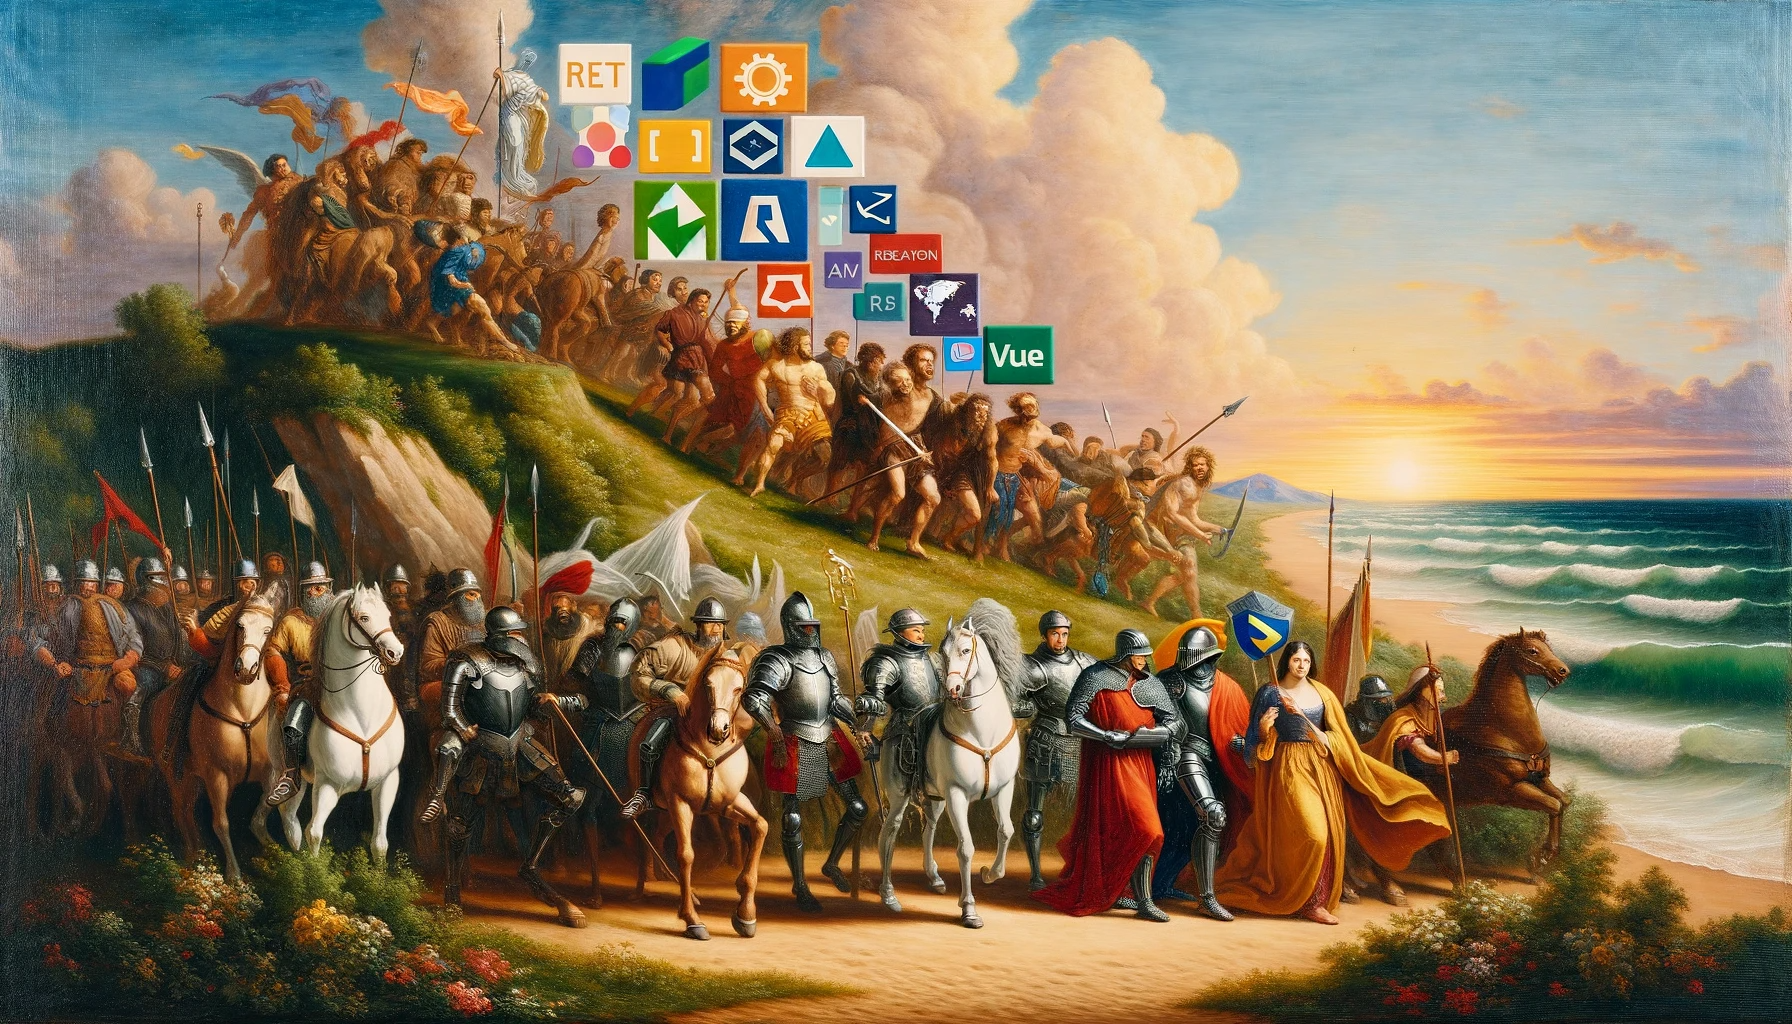 landscape-oriented images in a Renaissance oil painting style, depicting the evolution of web development frameworks